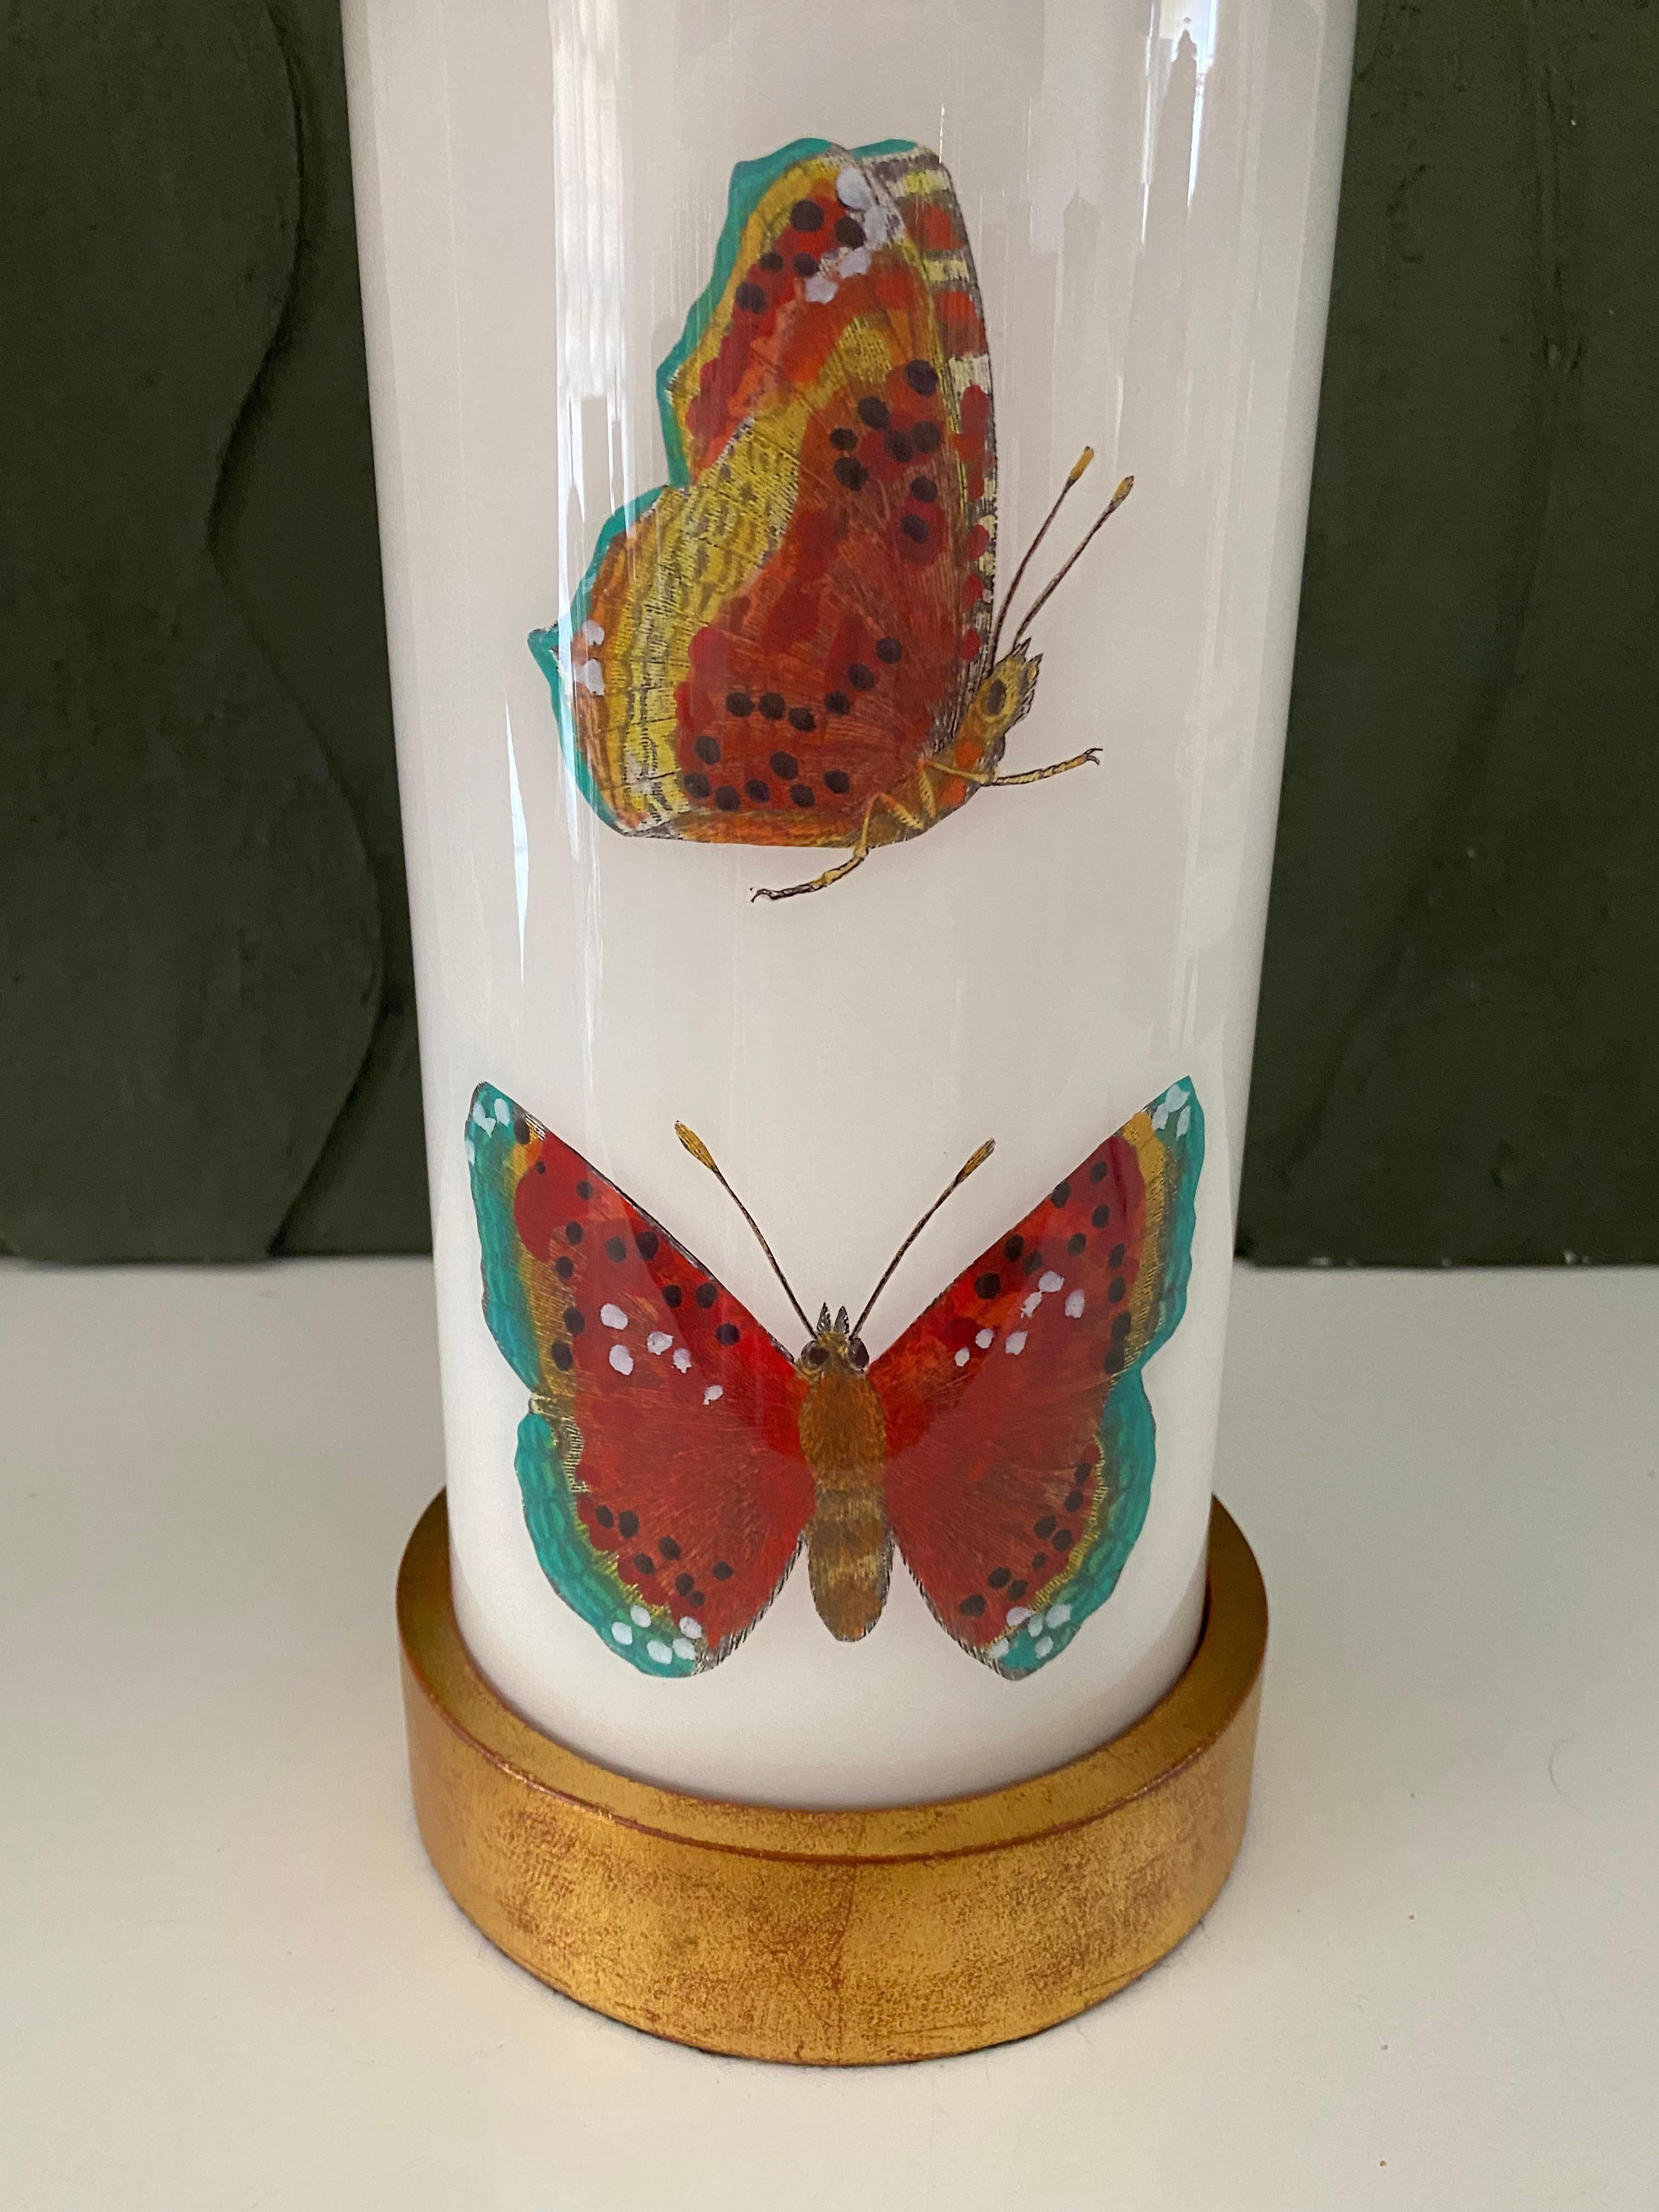 Hand made with care in Houston, Texas. This glass lamp features a selection of 18th century hand-colored engravings of beautiful insects in terracotta red hues against a soft white background, with hand-turned lightly distressed, gilt wood base and